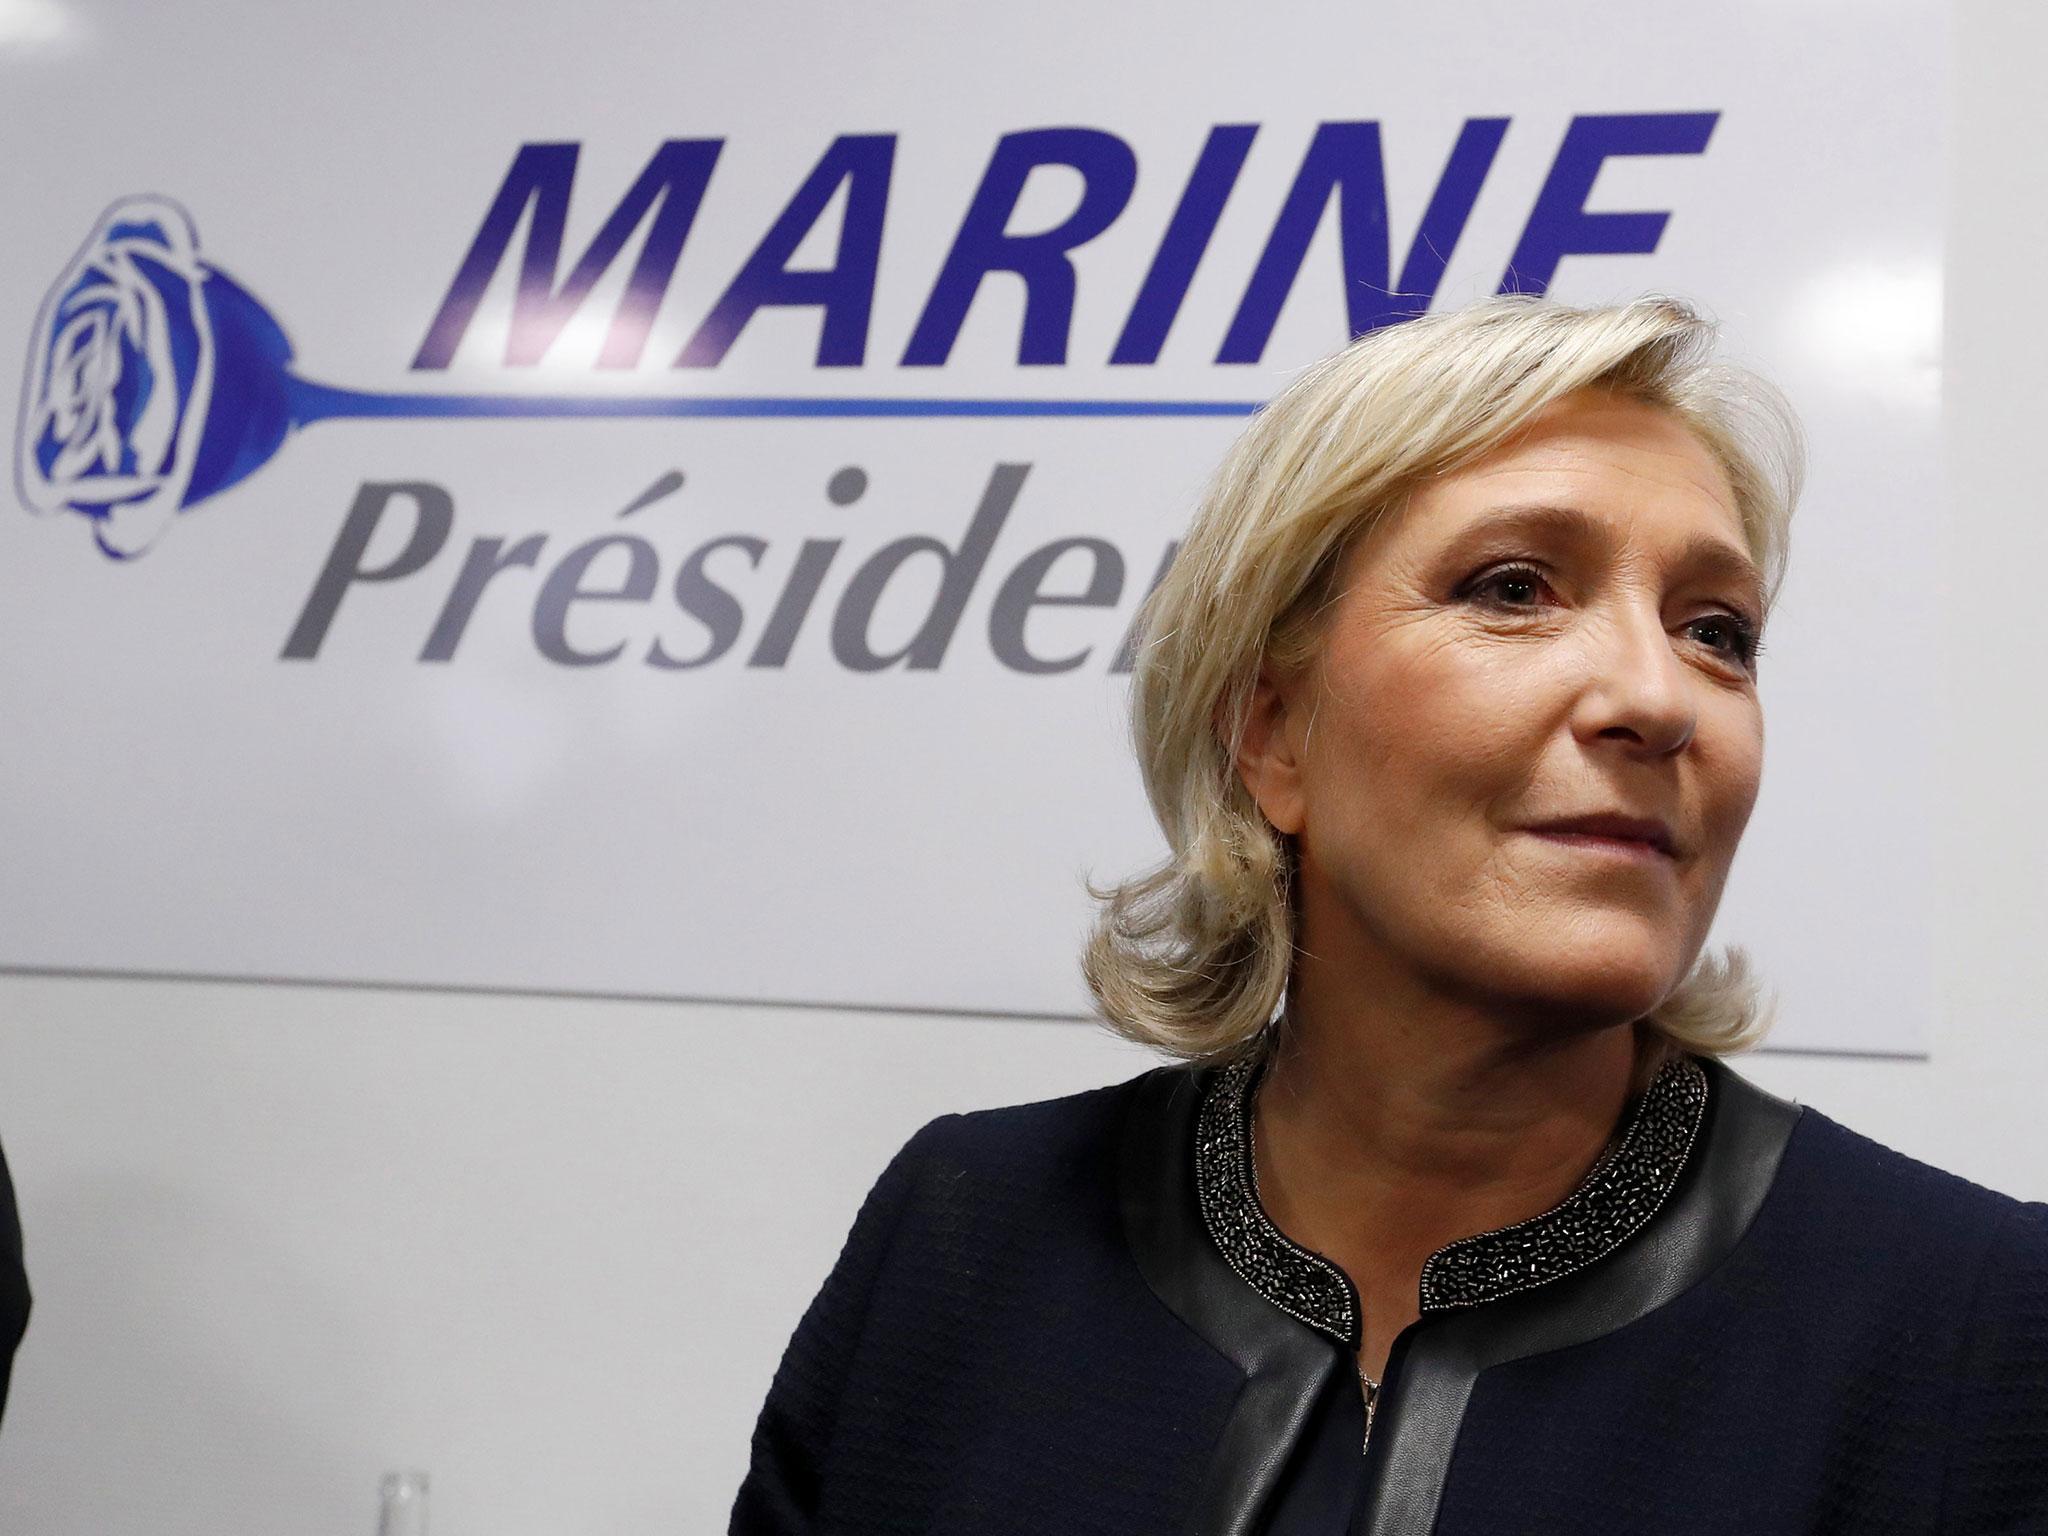 France's far-right National Front leader Marine Le Pen poses in front of a poster for her 2017 French presidential election campaign as she inaugurates her party campaign headquarters in Paris in November 2016